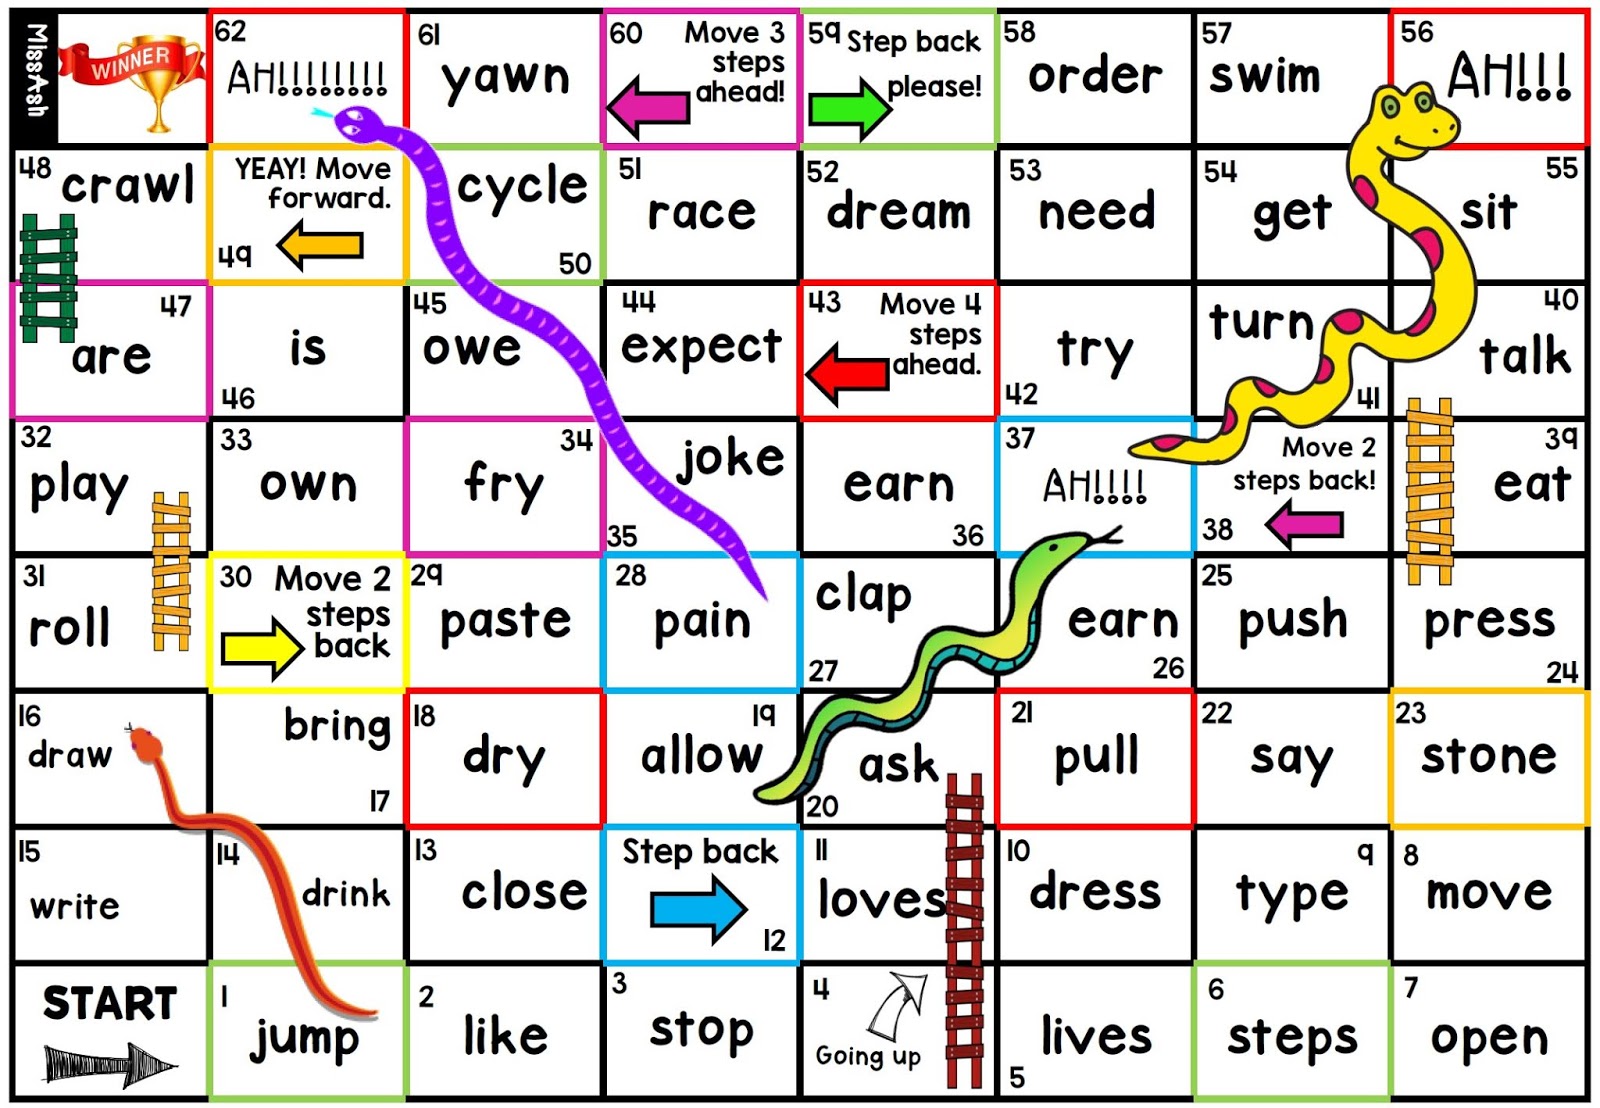 Can board game. Игра на past simple Snakes and Ladders. Snakes and Ladders Irregular verbs. Змейка past simple. Игры на английскомsnakesandladders.